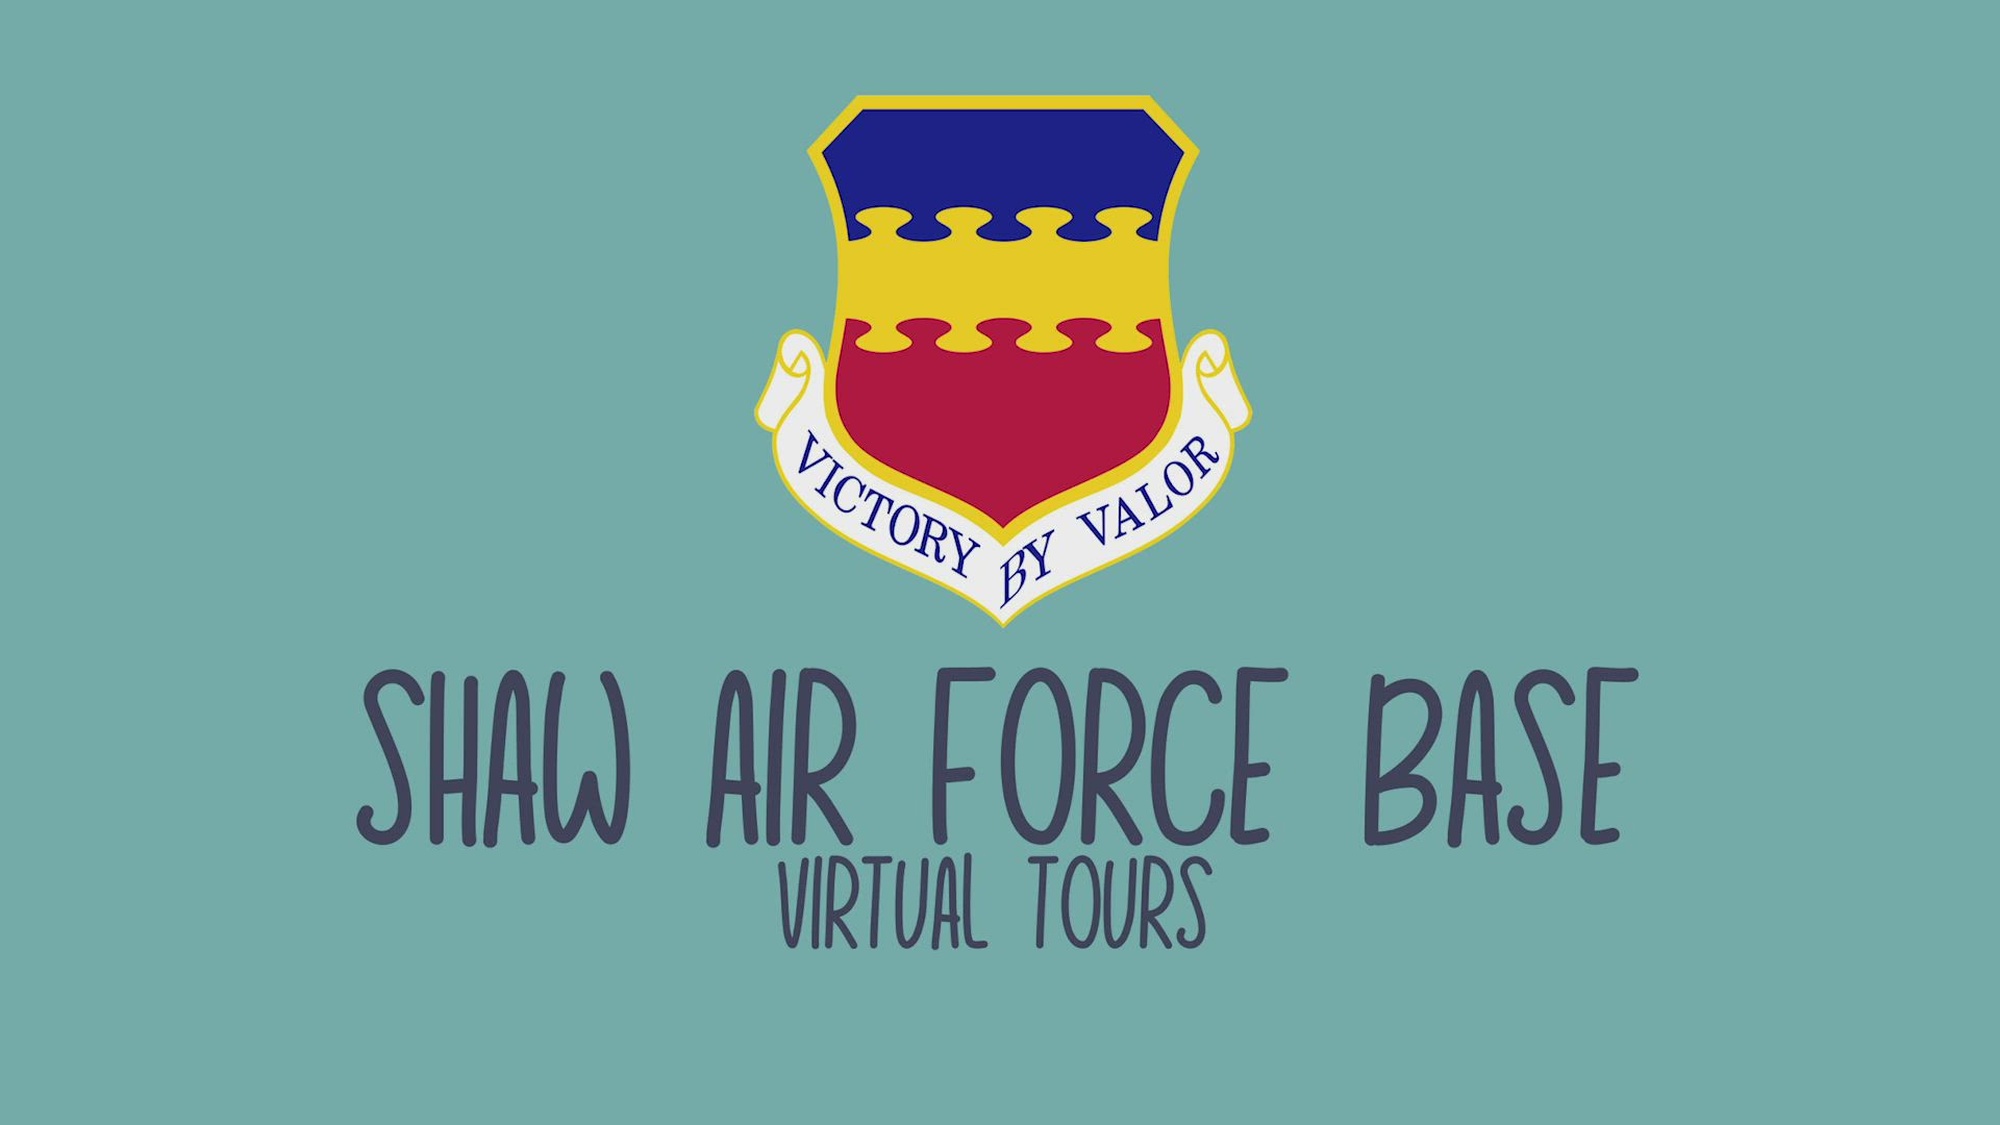 A video showcasing the 28th Operational Weather Squadron as part of the Shaw Air Force Base Virtual Tour series.